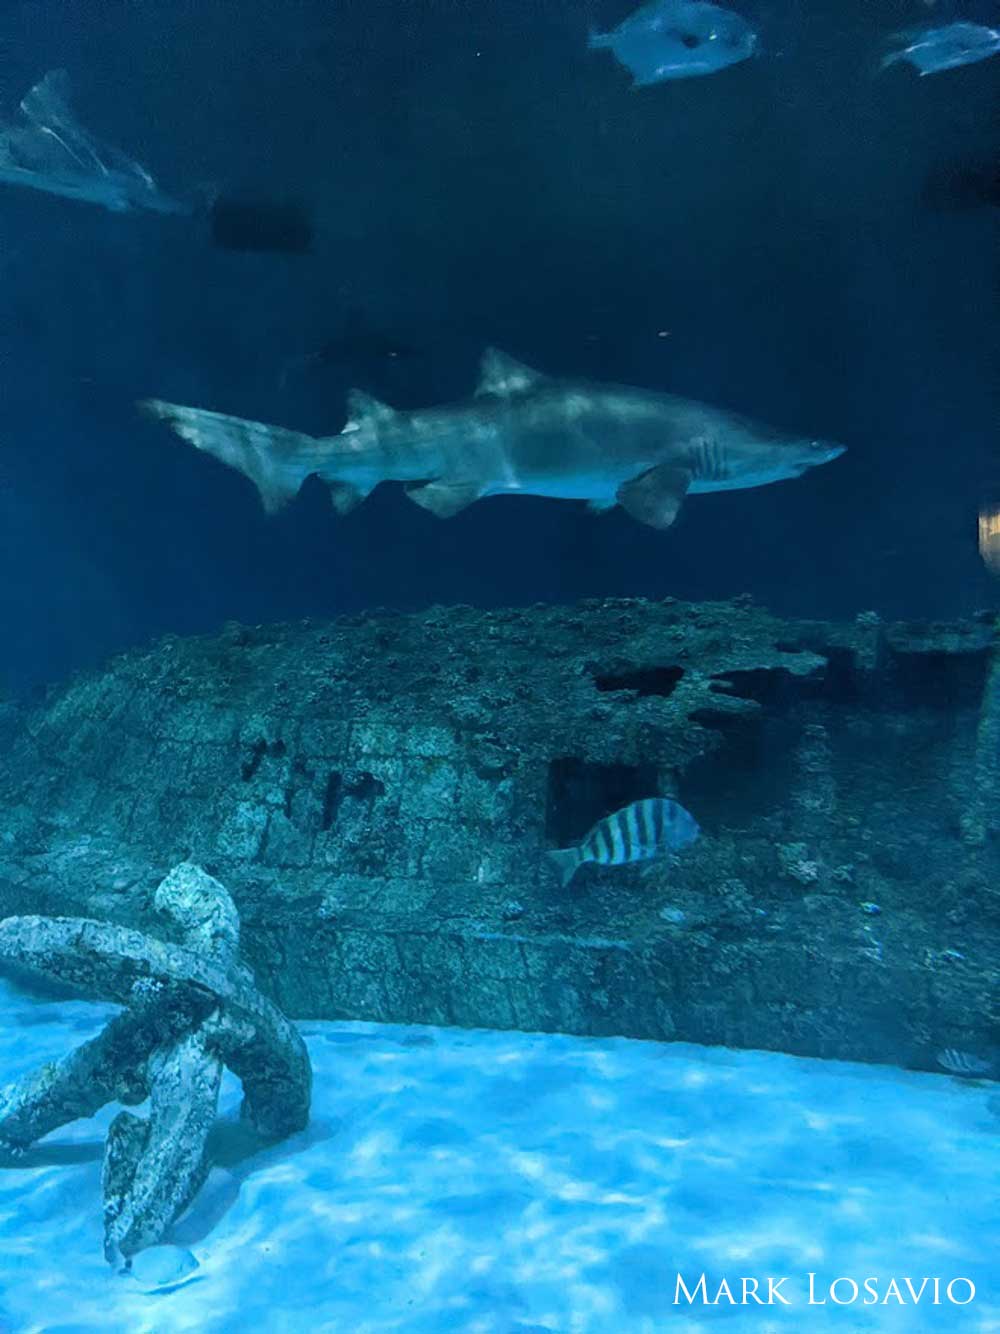 Shark swims over a part of a shipwreck in an aquarium with other fish swimming nearby.